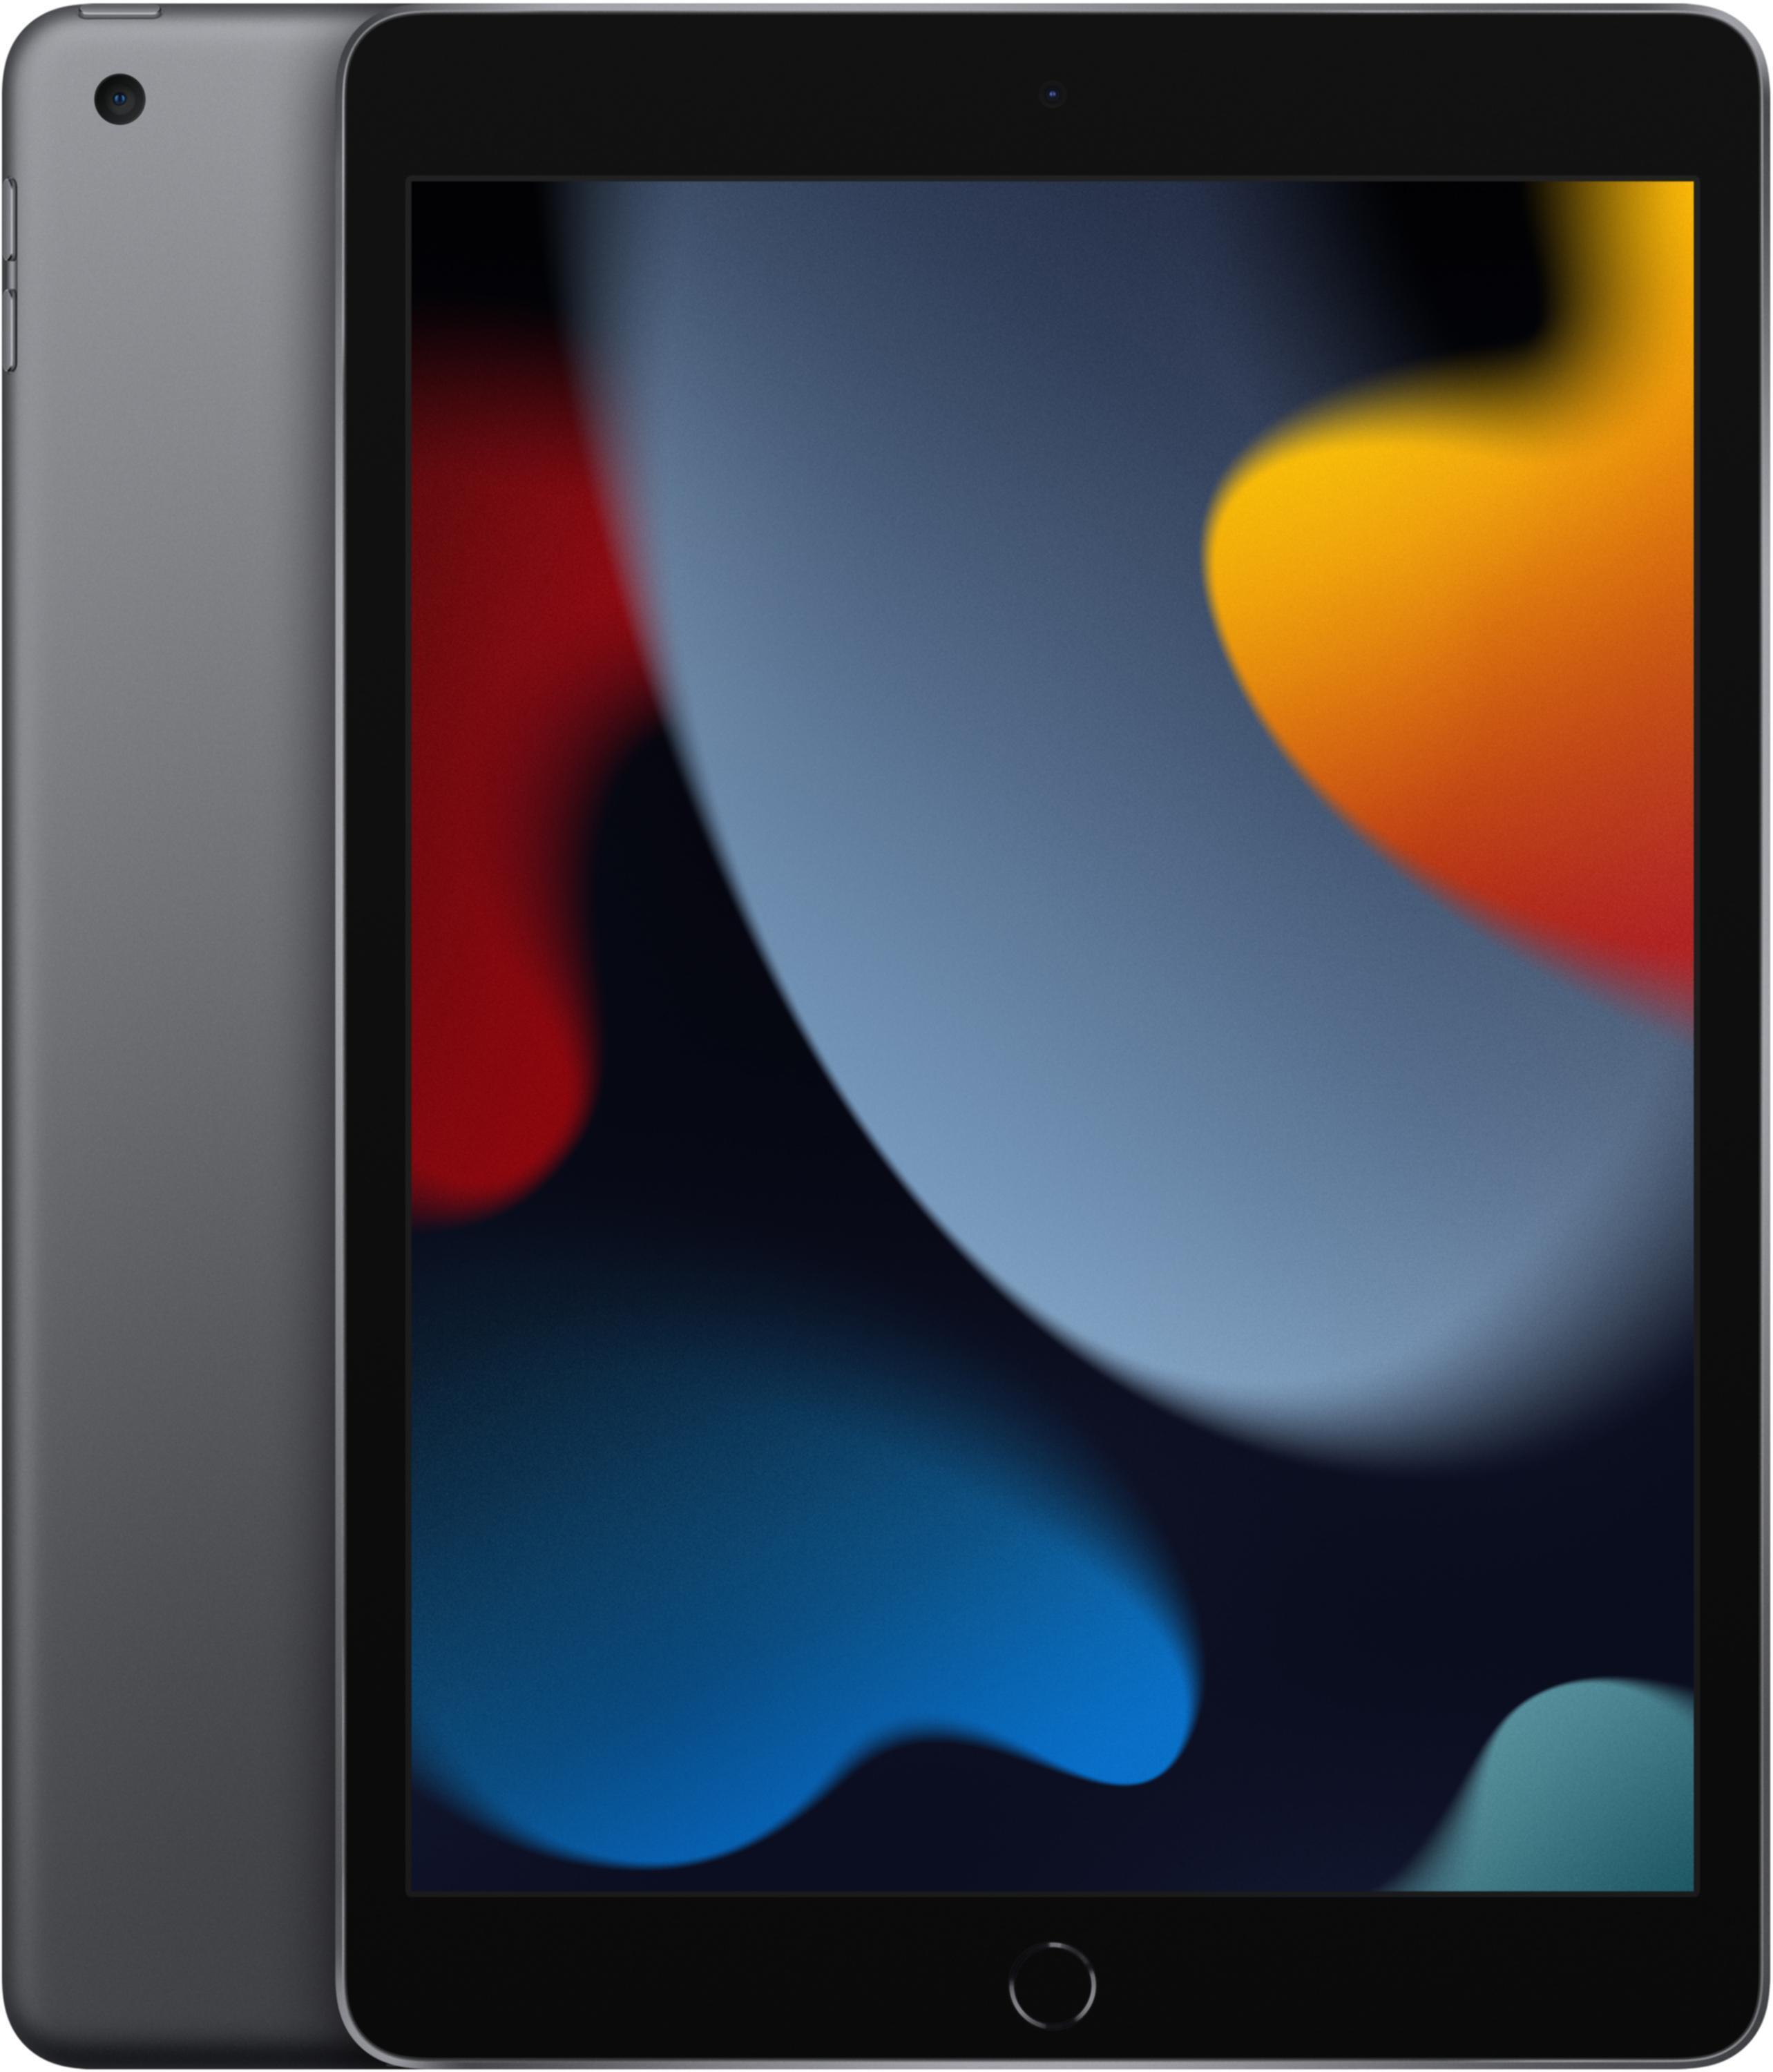 Apple iPad Air 2 Wi-Fi + Cellular 64GB - Space Gray | Sweetwater